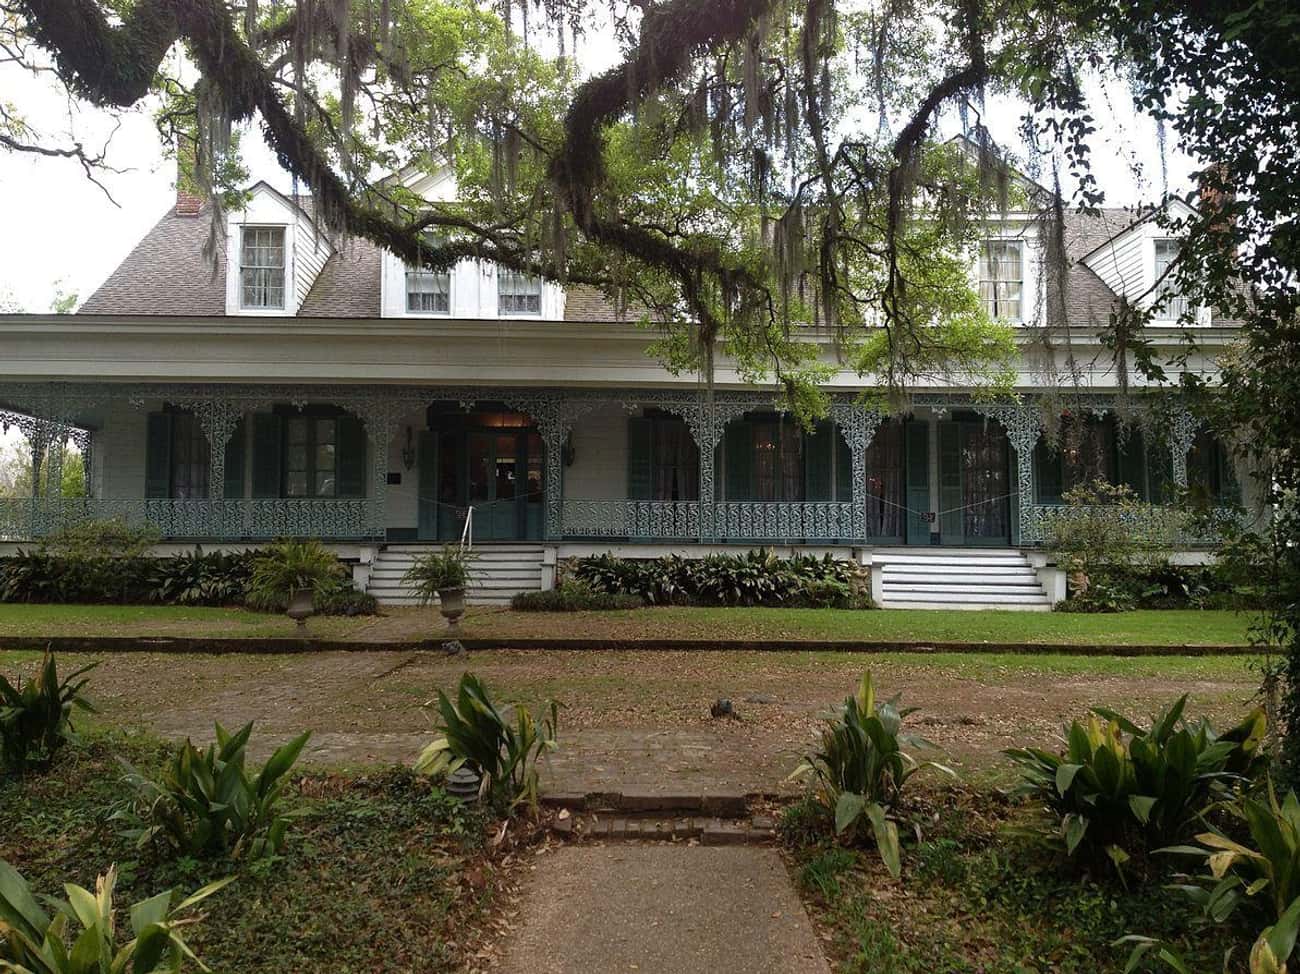 A Spirit Known As Chloe Appears In Photographs At The Myrtles Plantation